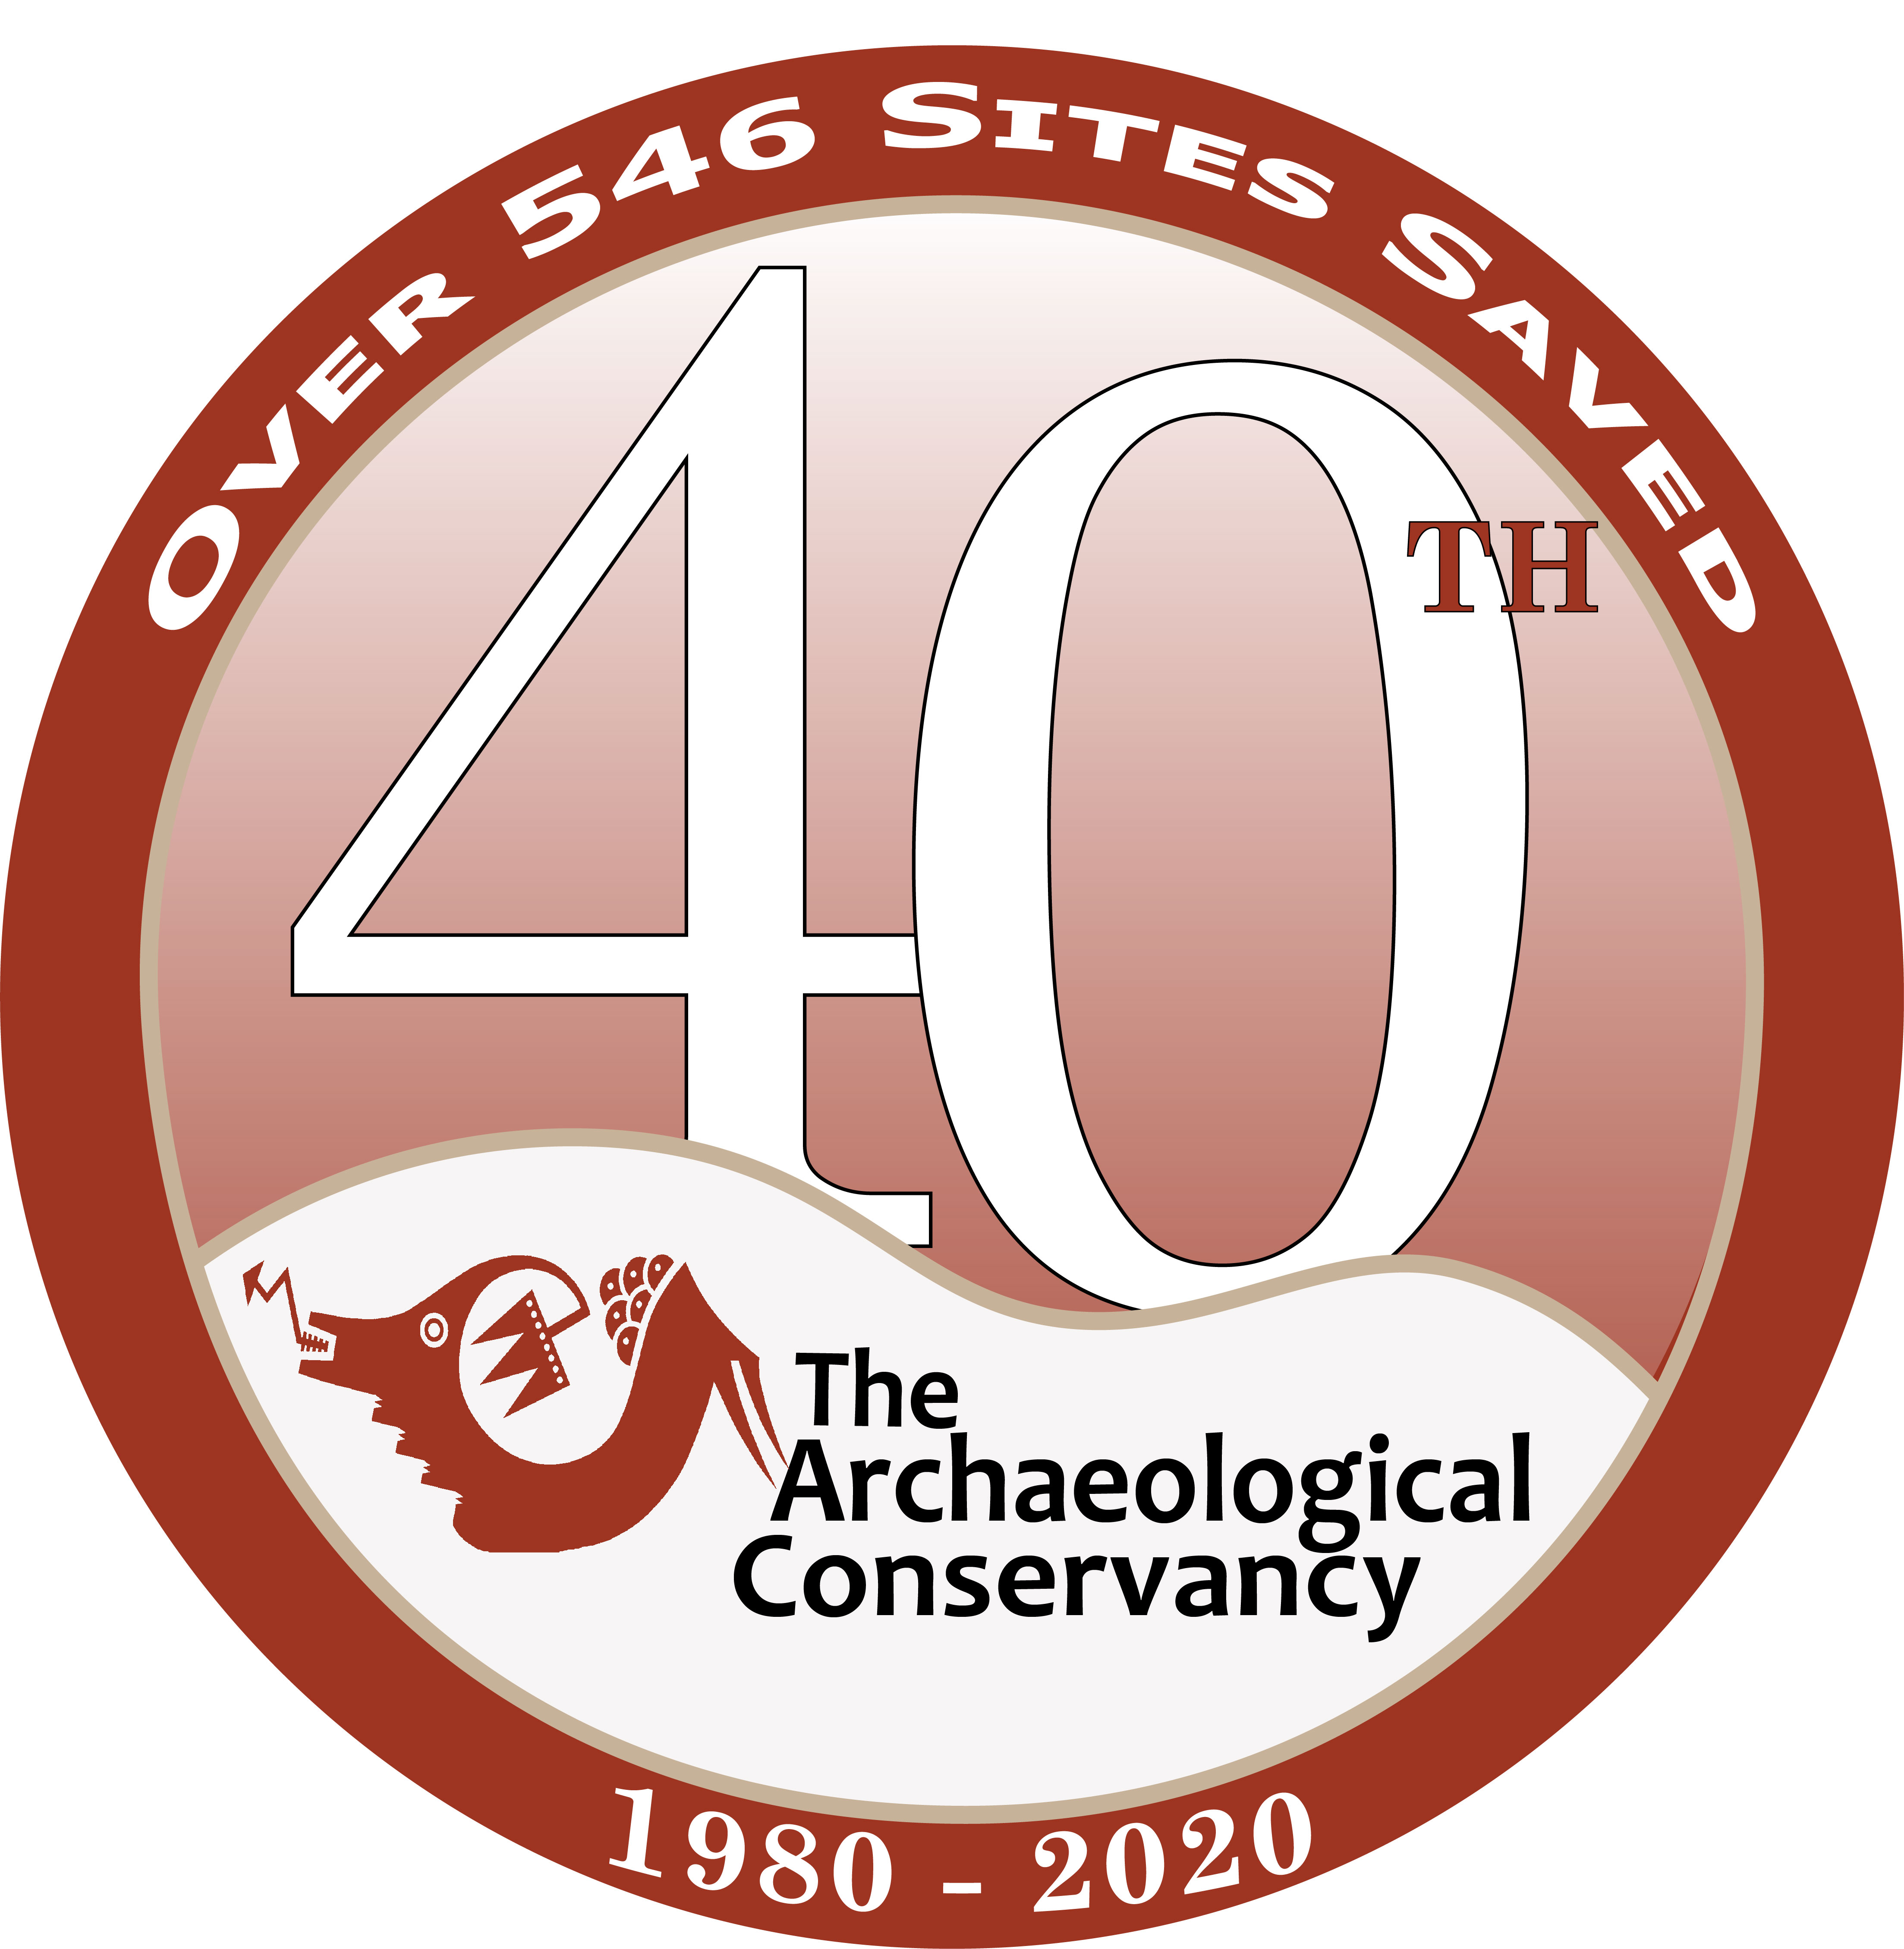 Over the past four decades, The Archaeological Conservancy has saved over 546 sites with the generous support of our members.